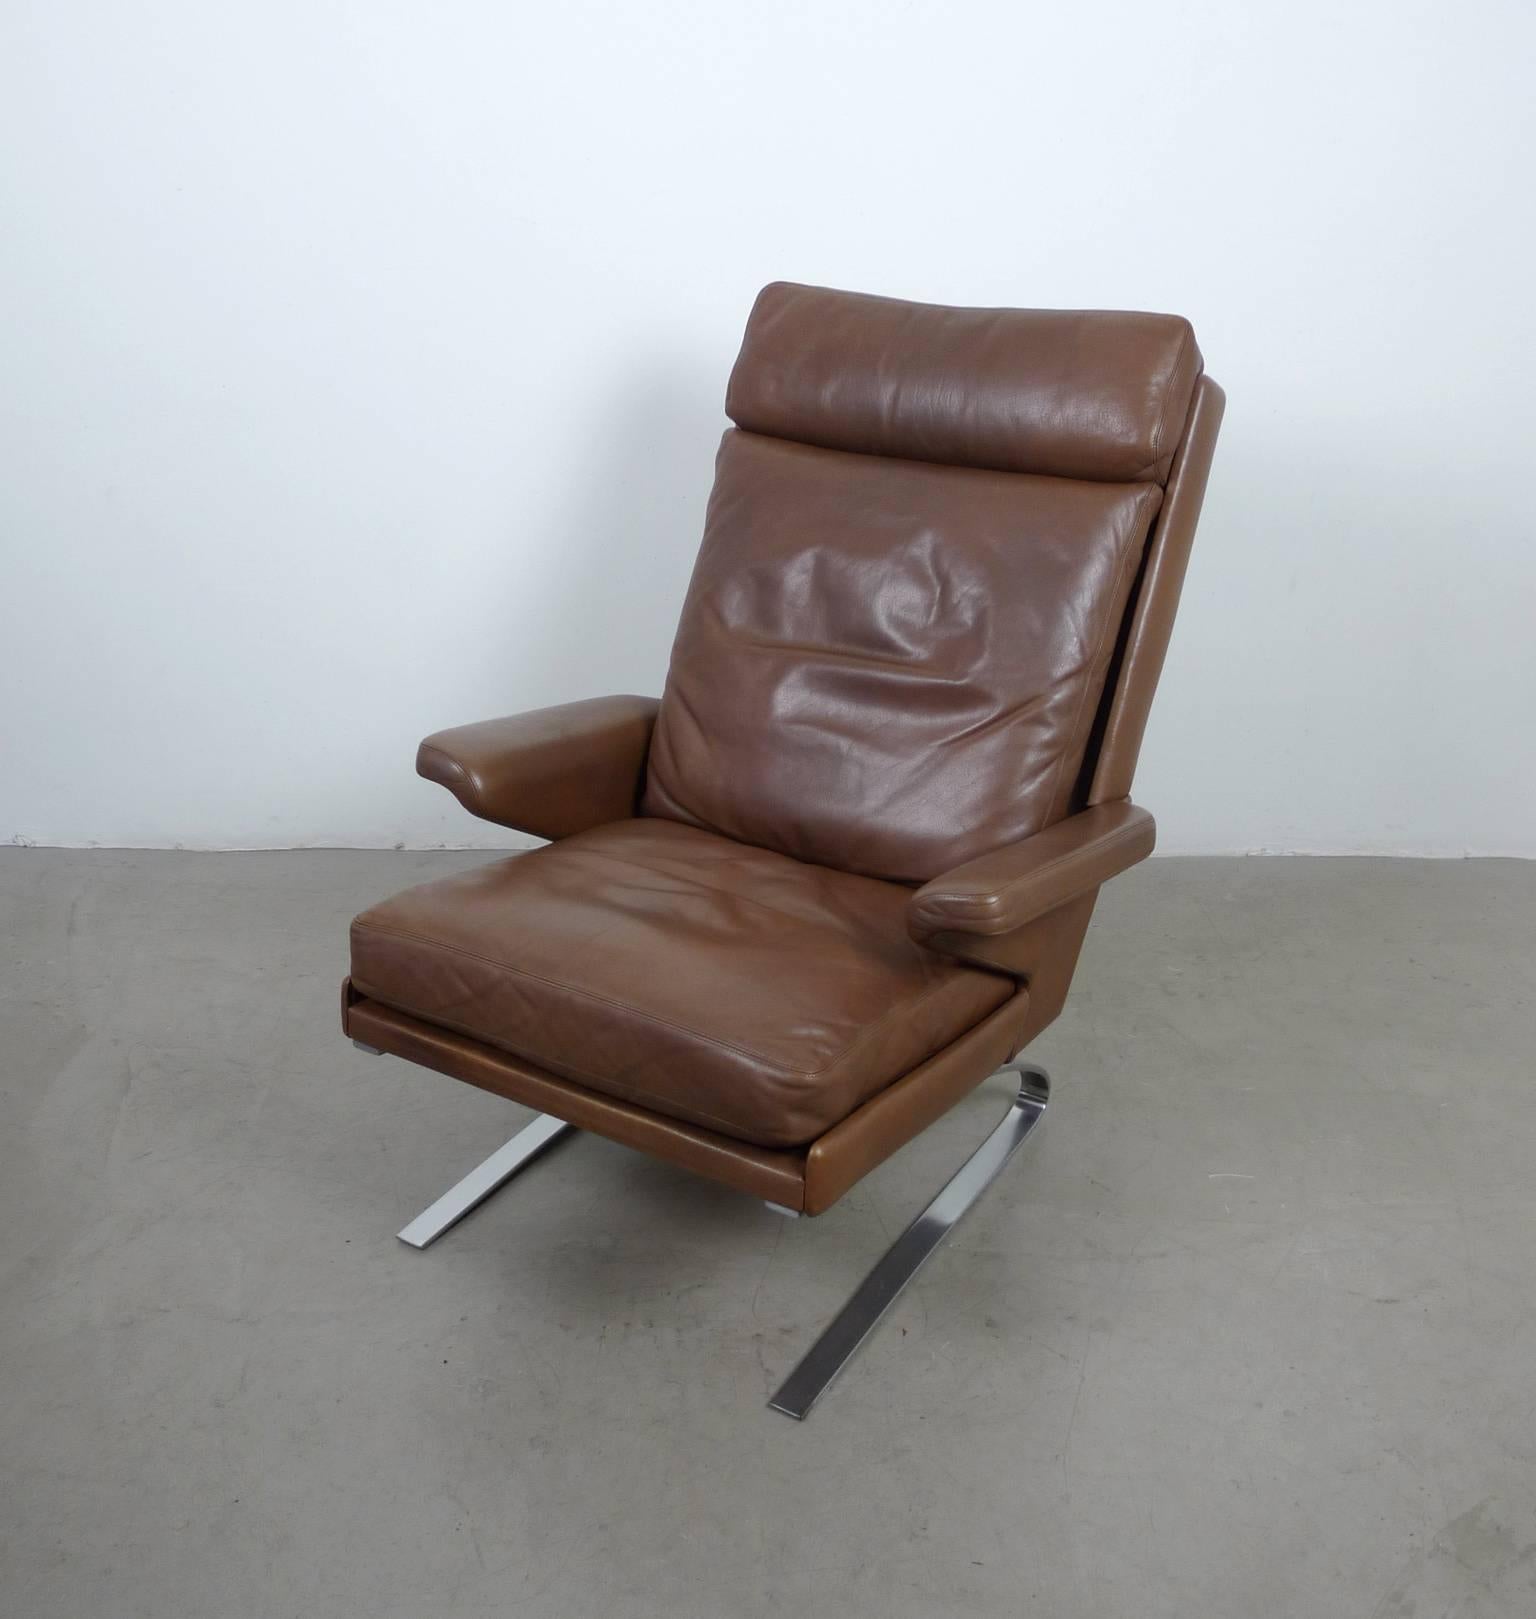 In 1968 Reinhold Adolf designed the model Swing chair for the German manufacturer COR. This version is upholstered in leather, with high backrest and armrests. The two skids are made of solid flat steel in the form of a sinusoid. It features a